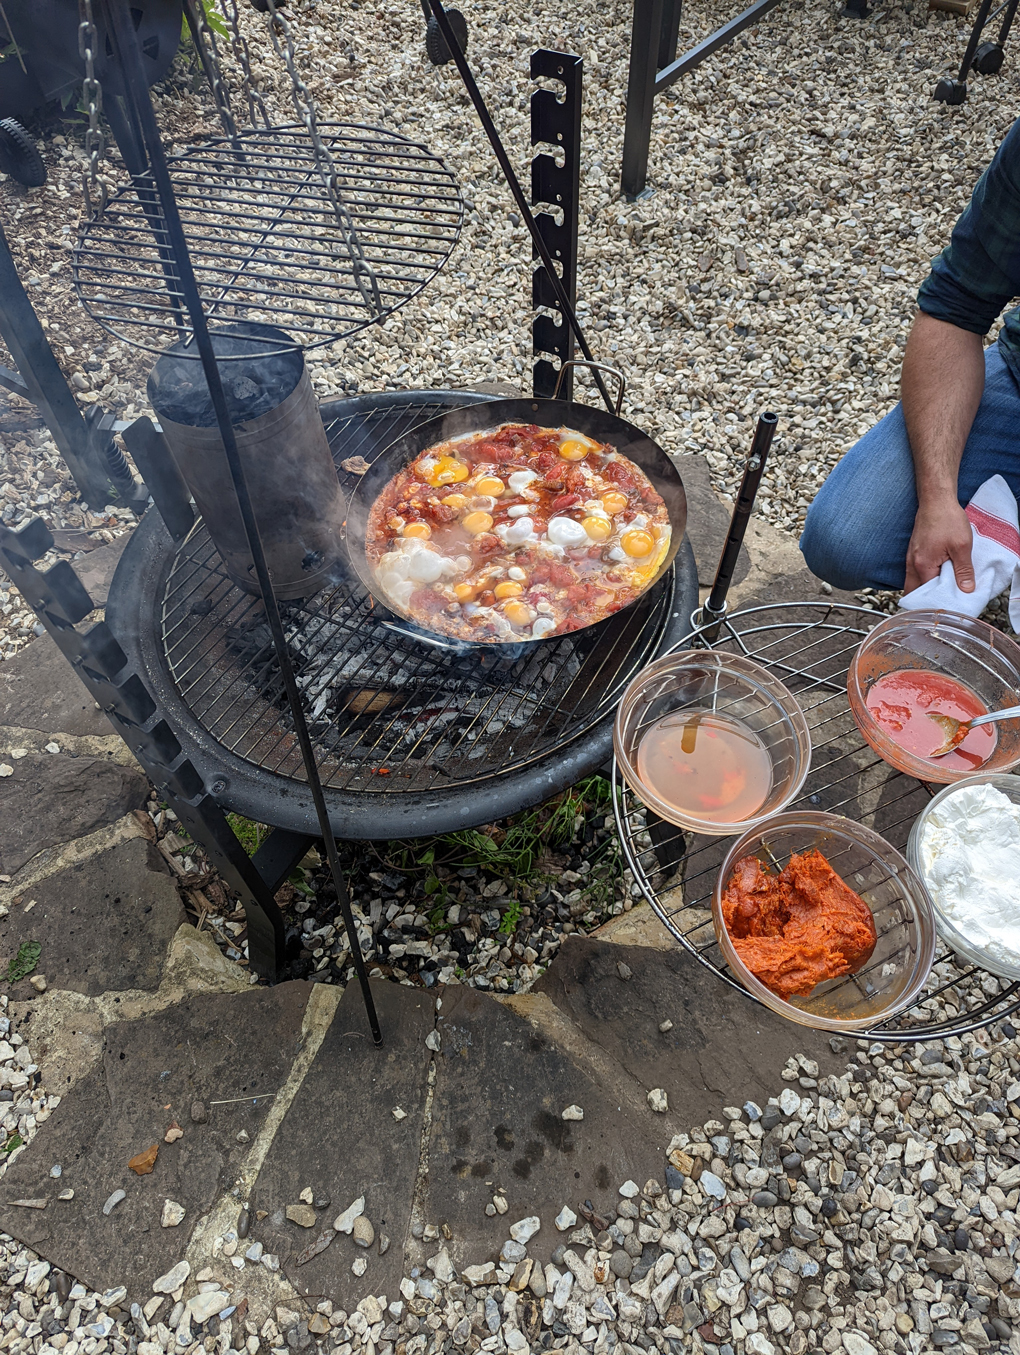 Shakshuka being cooked on a barbecue with a plate of additional ingredients next to it